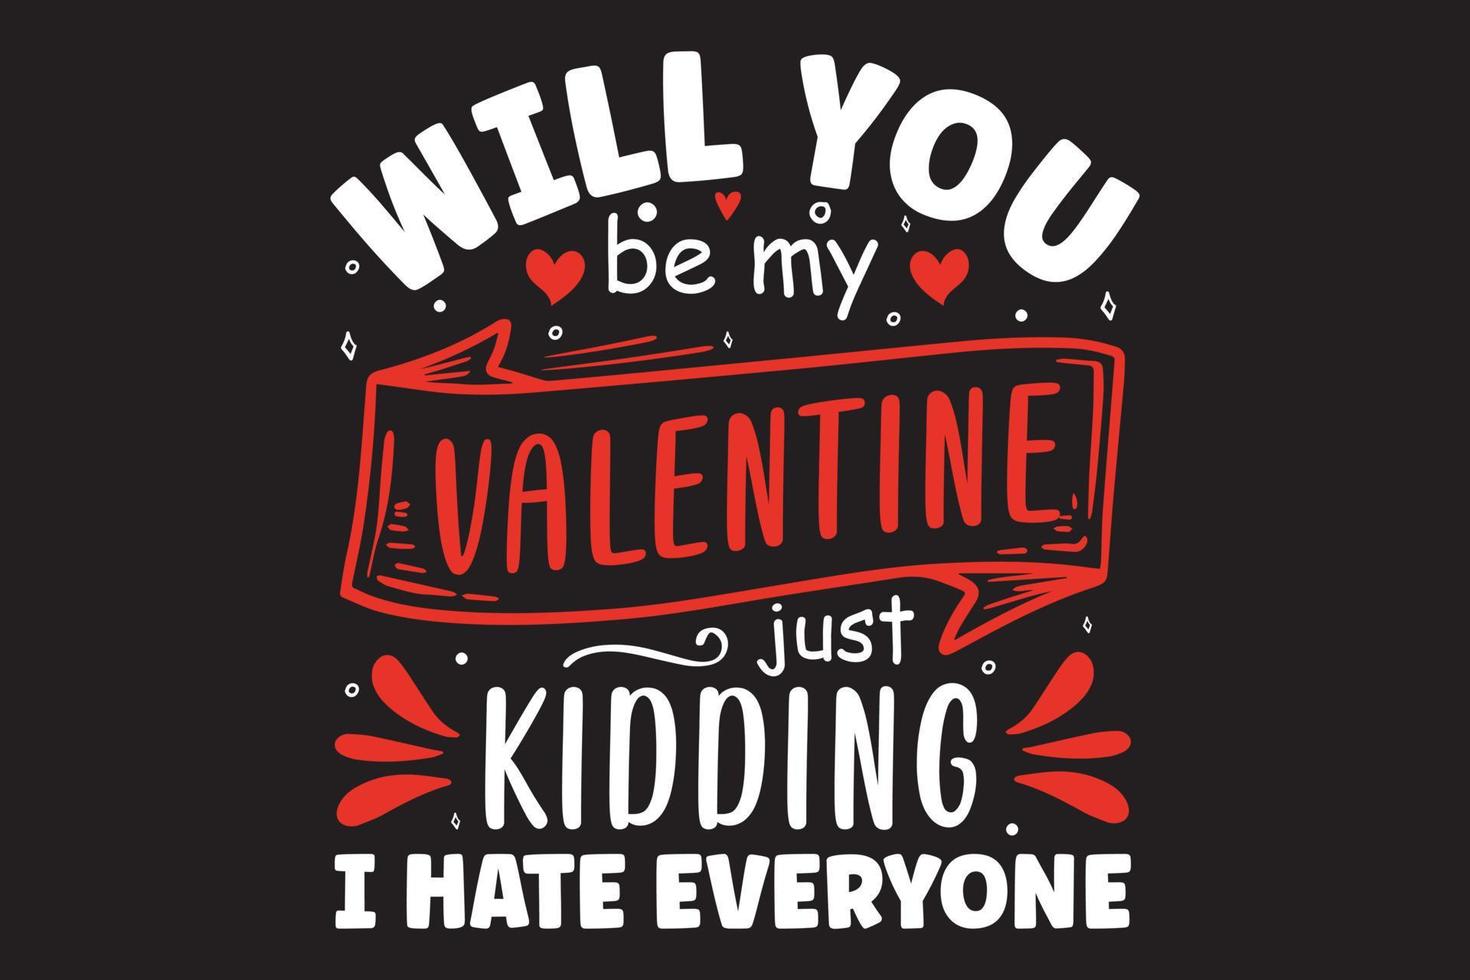 Will you be my valentine just kidding I hate everyone typography valentine t-shirt template vector